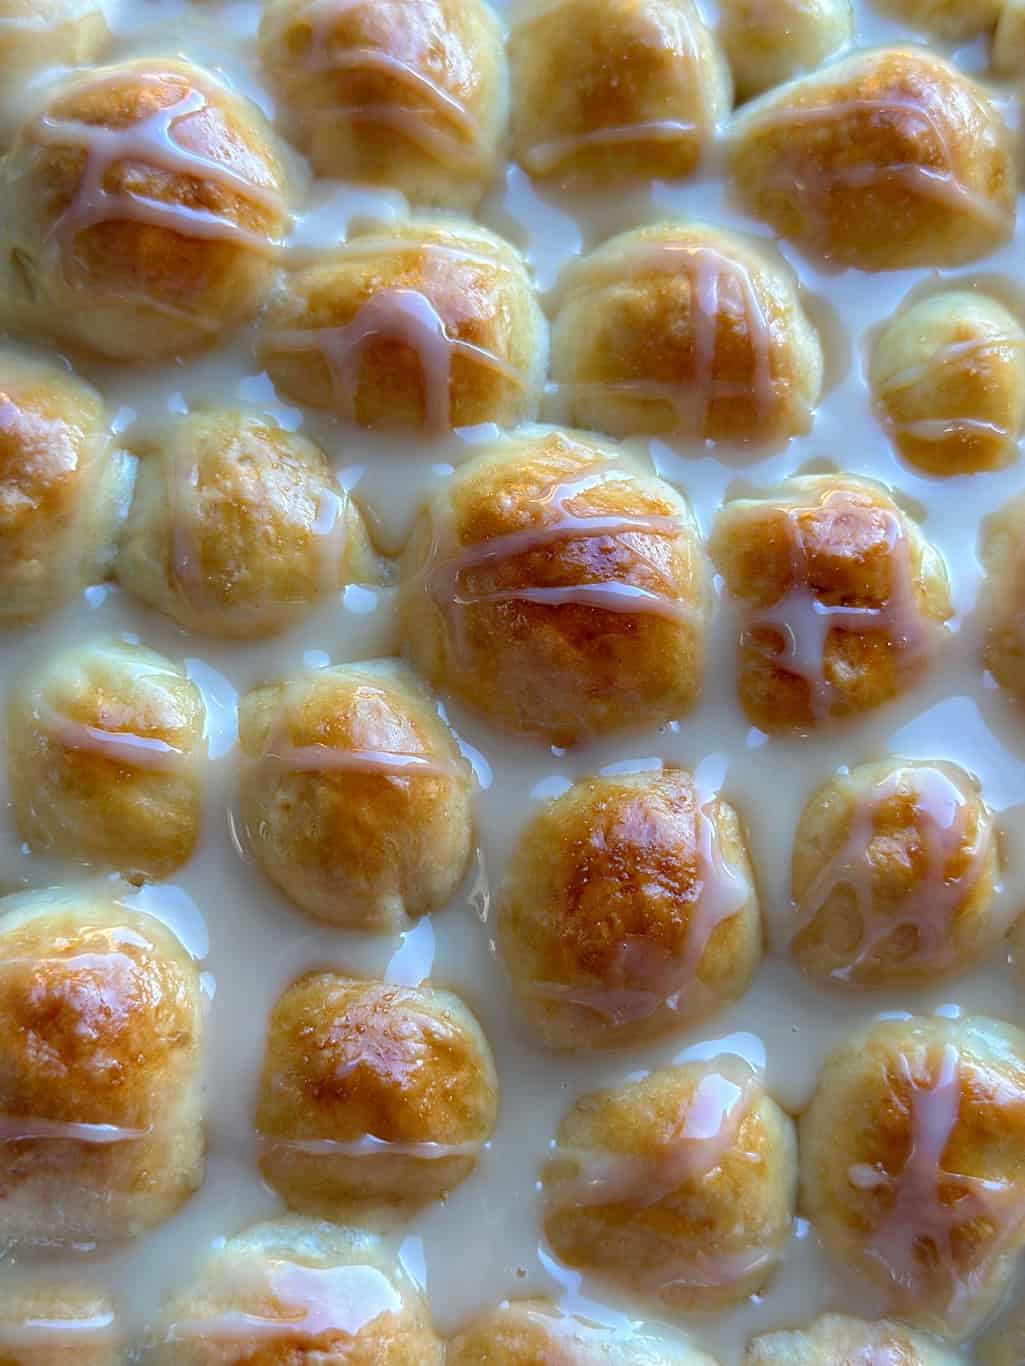 Pull apart bread soaked in condensed milk